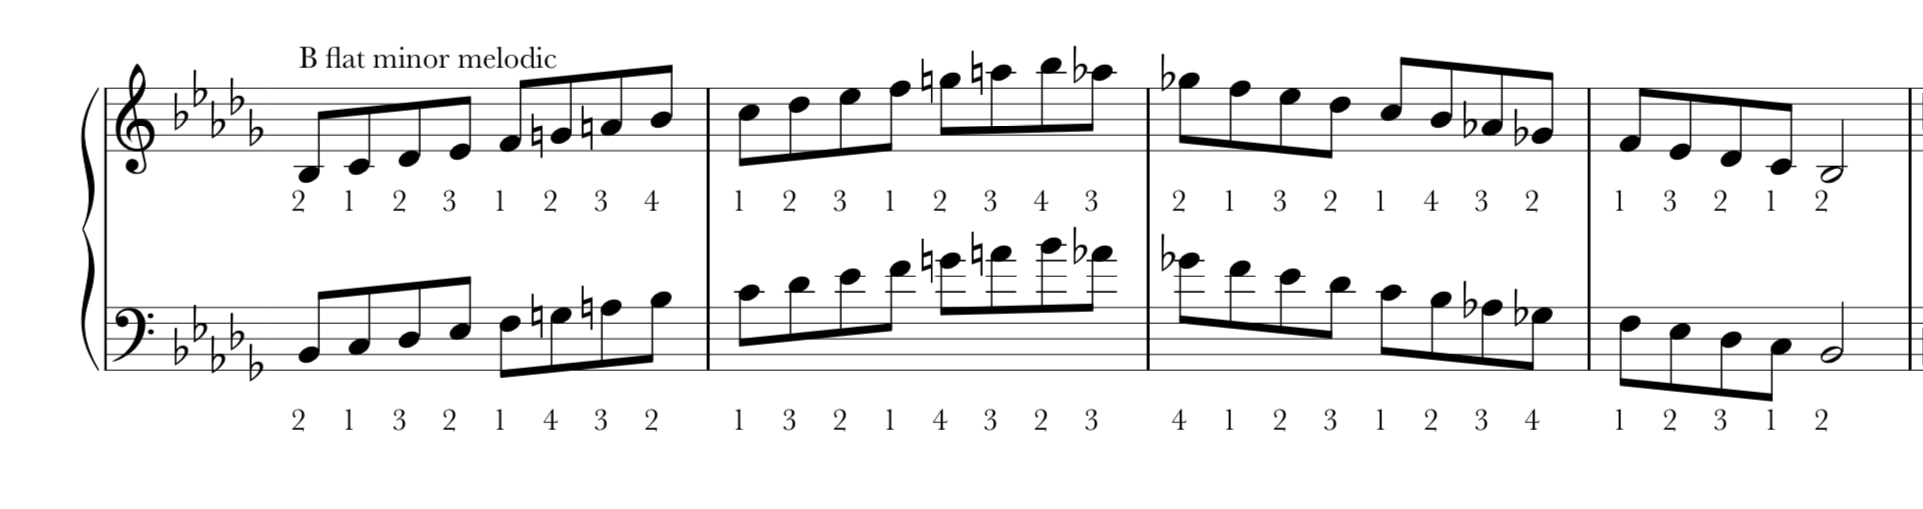 b flat minor scale equal to